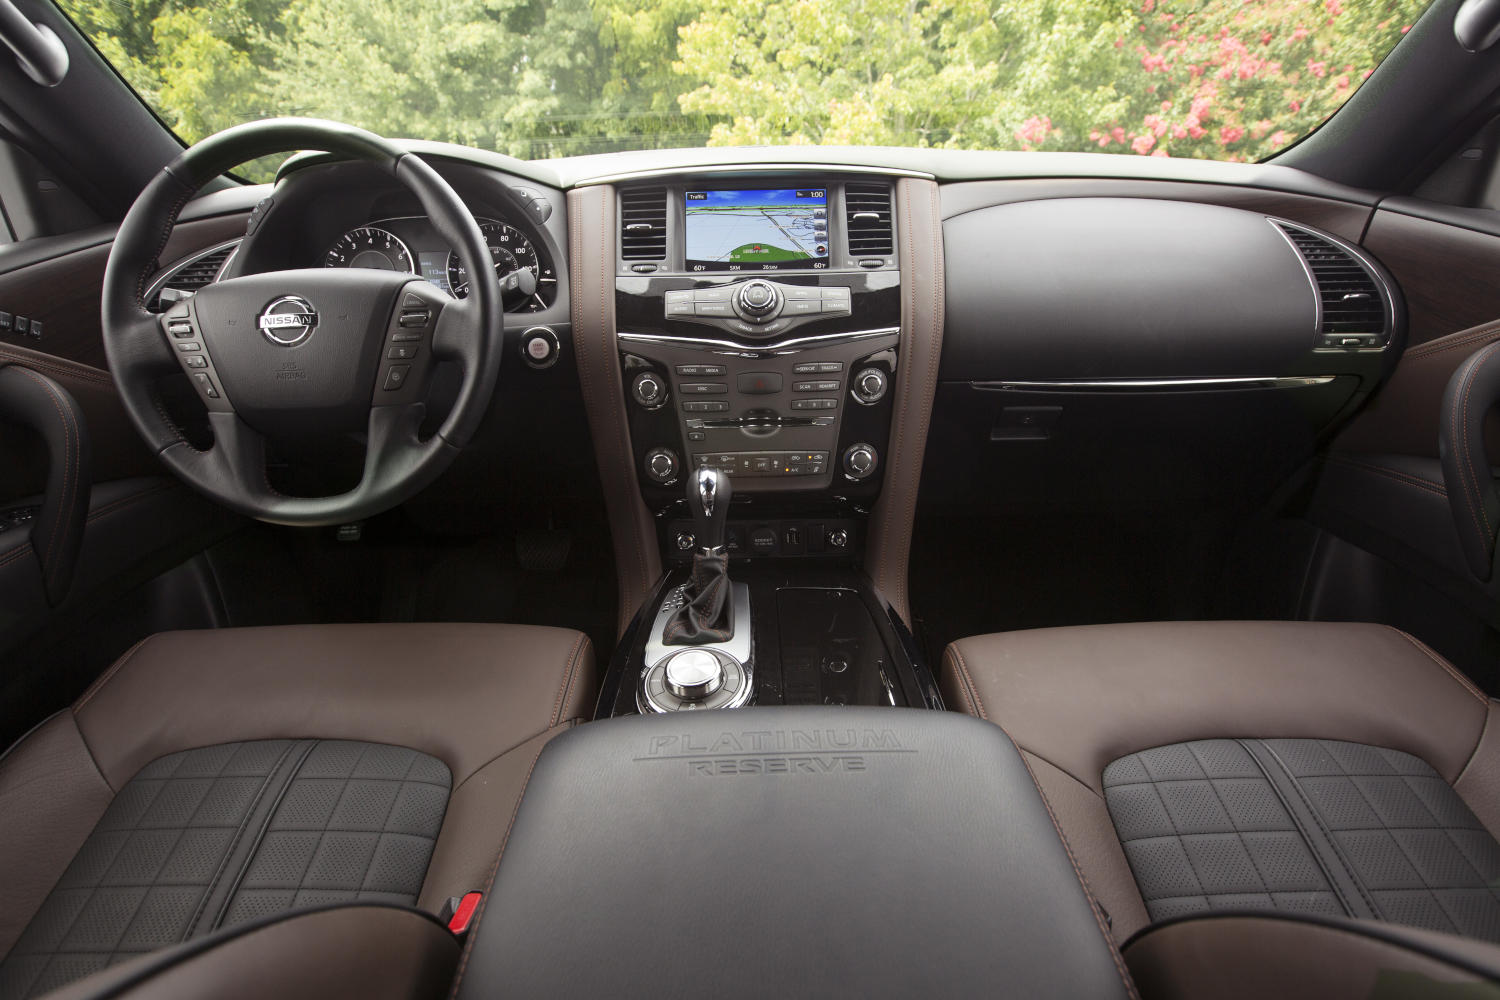 Inside the reliable 2020 Nissan Armada used SUV